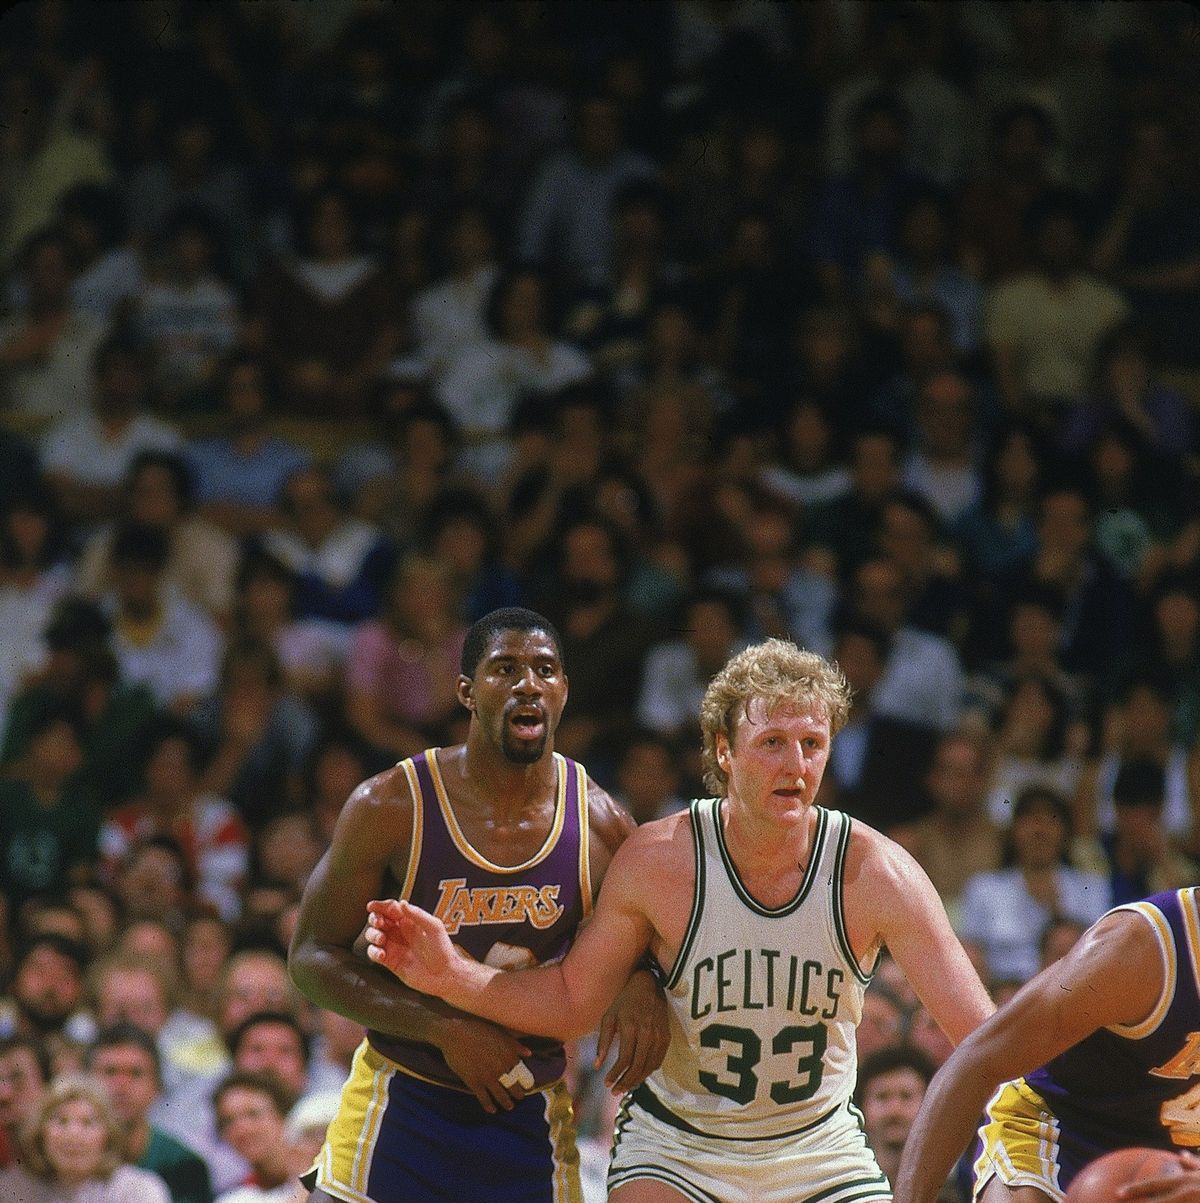 Have We Seen the Last of the Celtics-Lakers Rivalry?